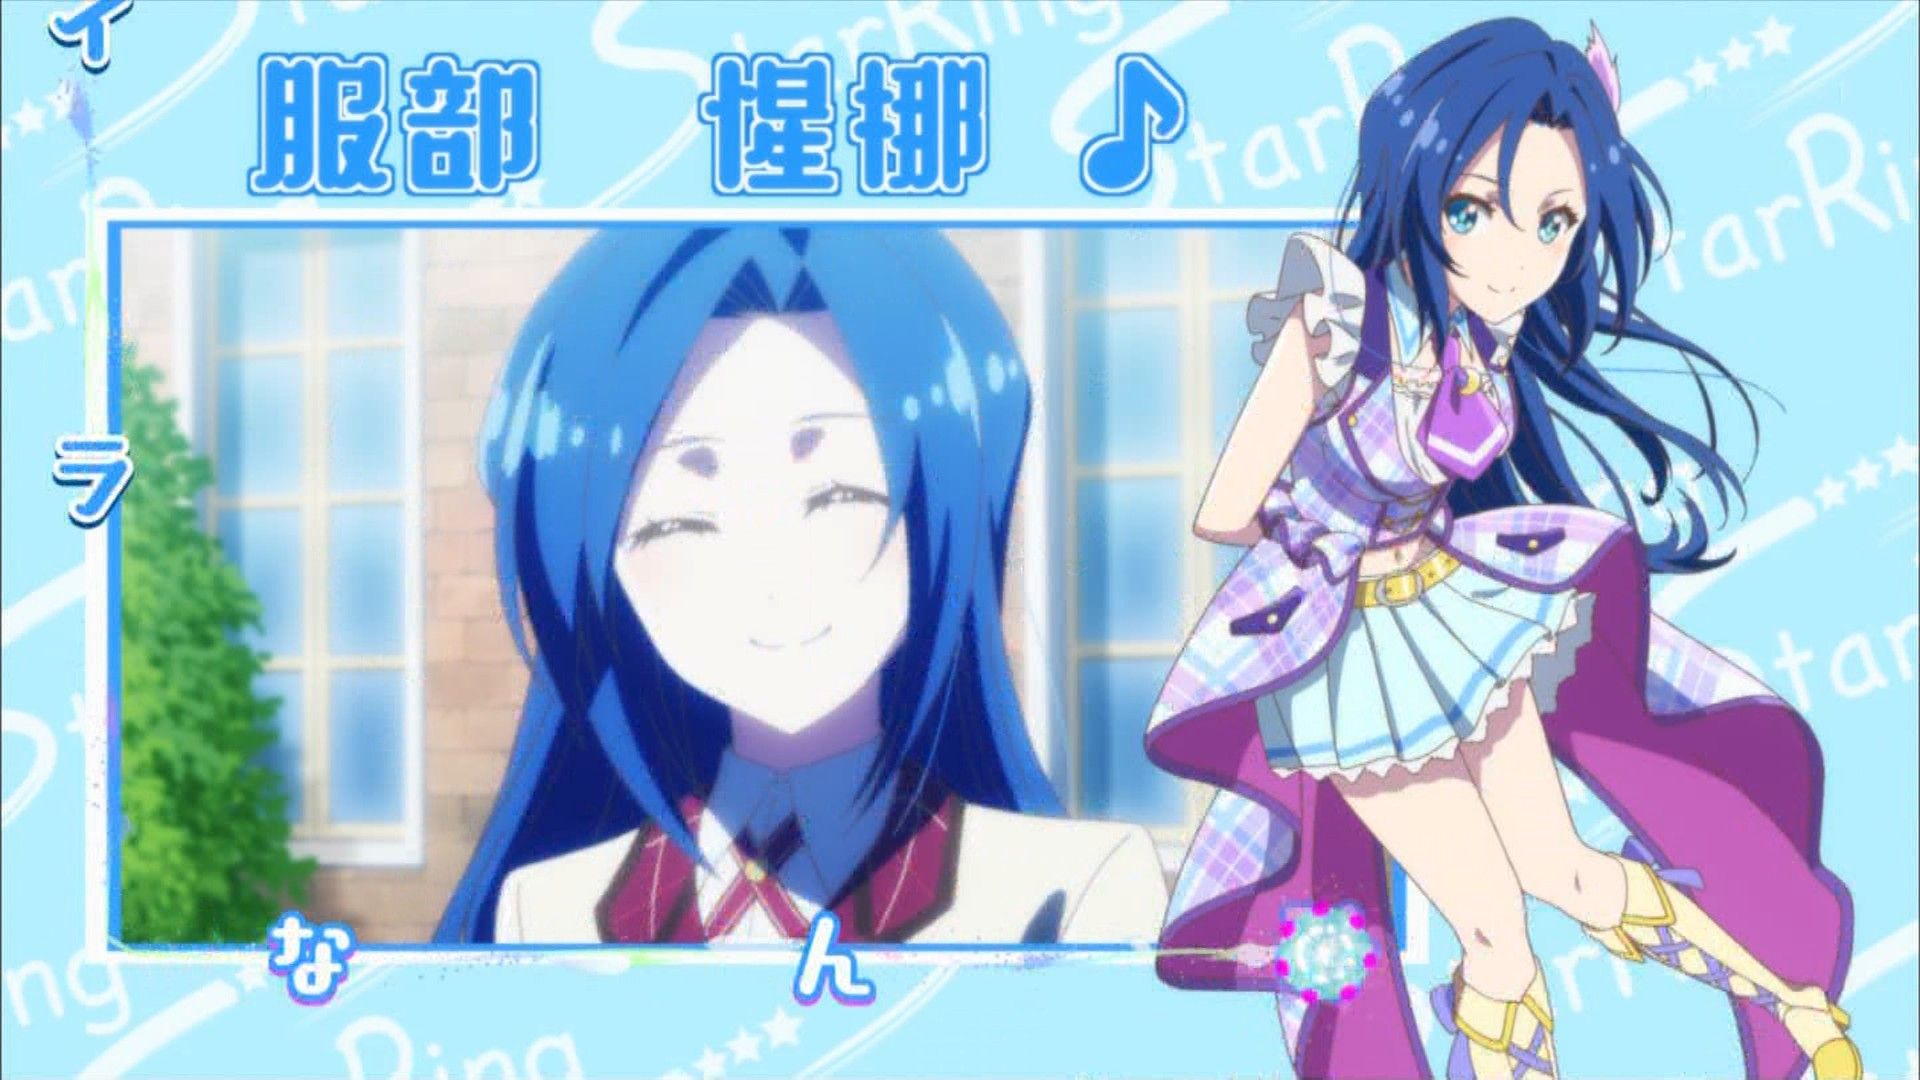 [Autumn anime] "Idol memories' story, suddenly became real part starting www wwwwww 2